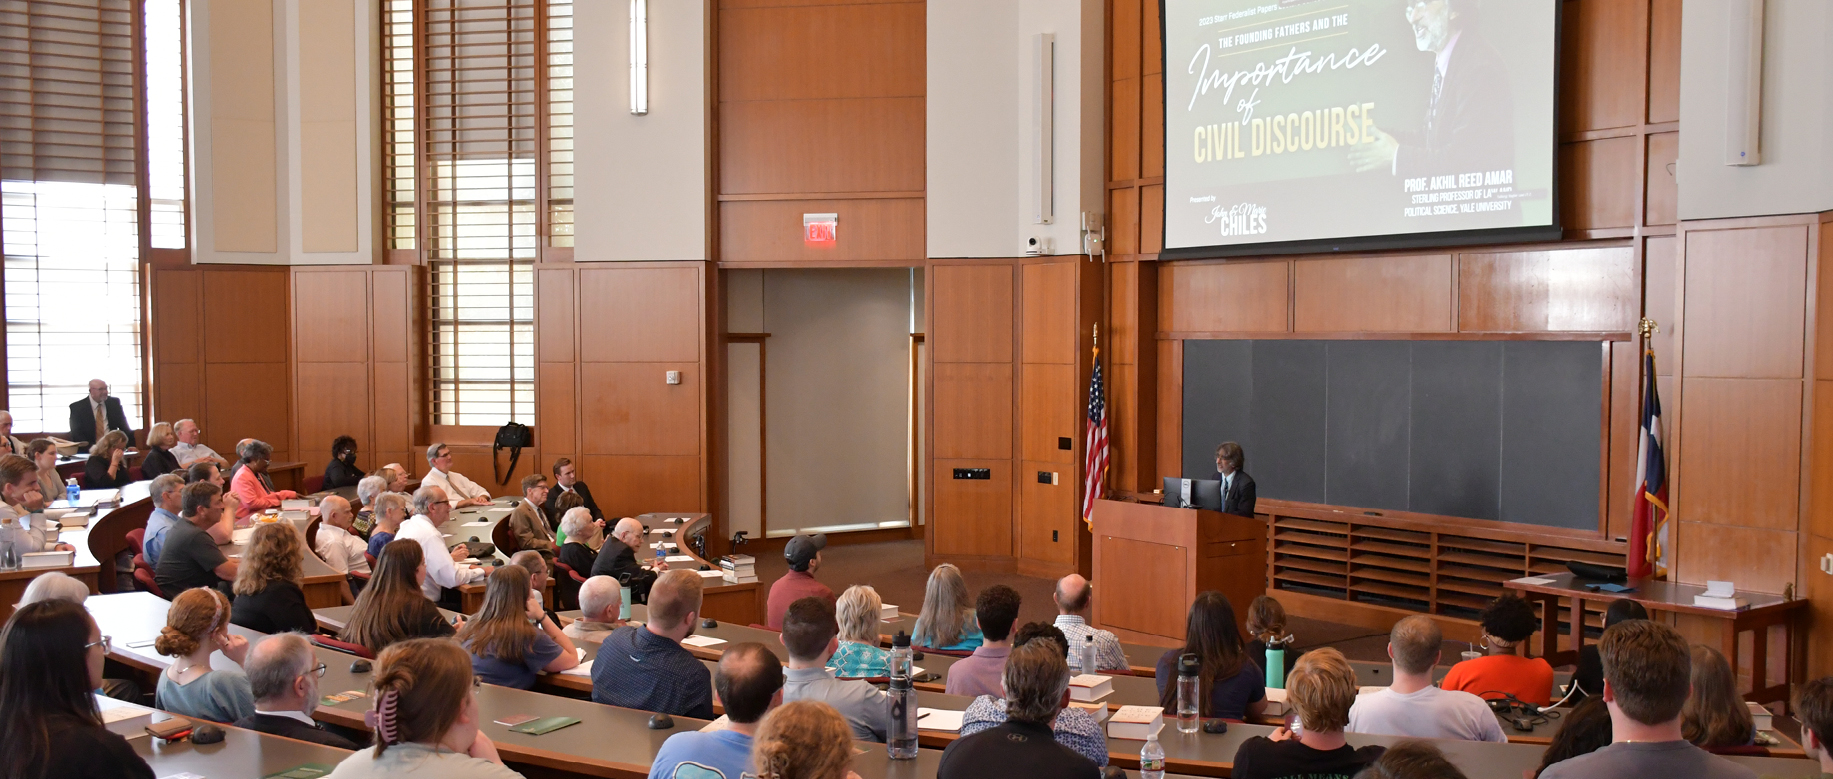 Prof. Amar in front of a large crowd at Baylor Law